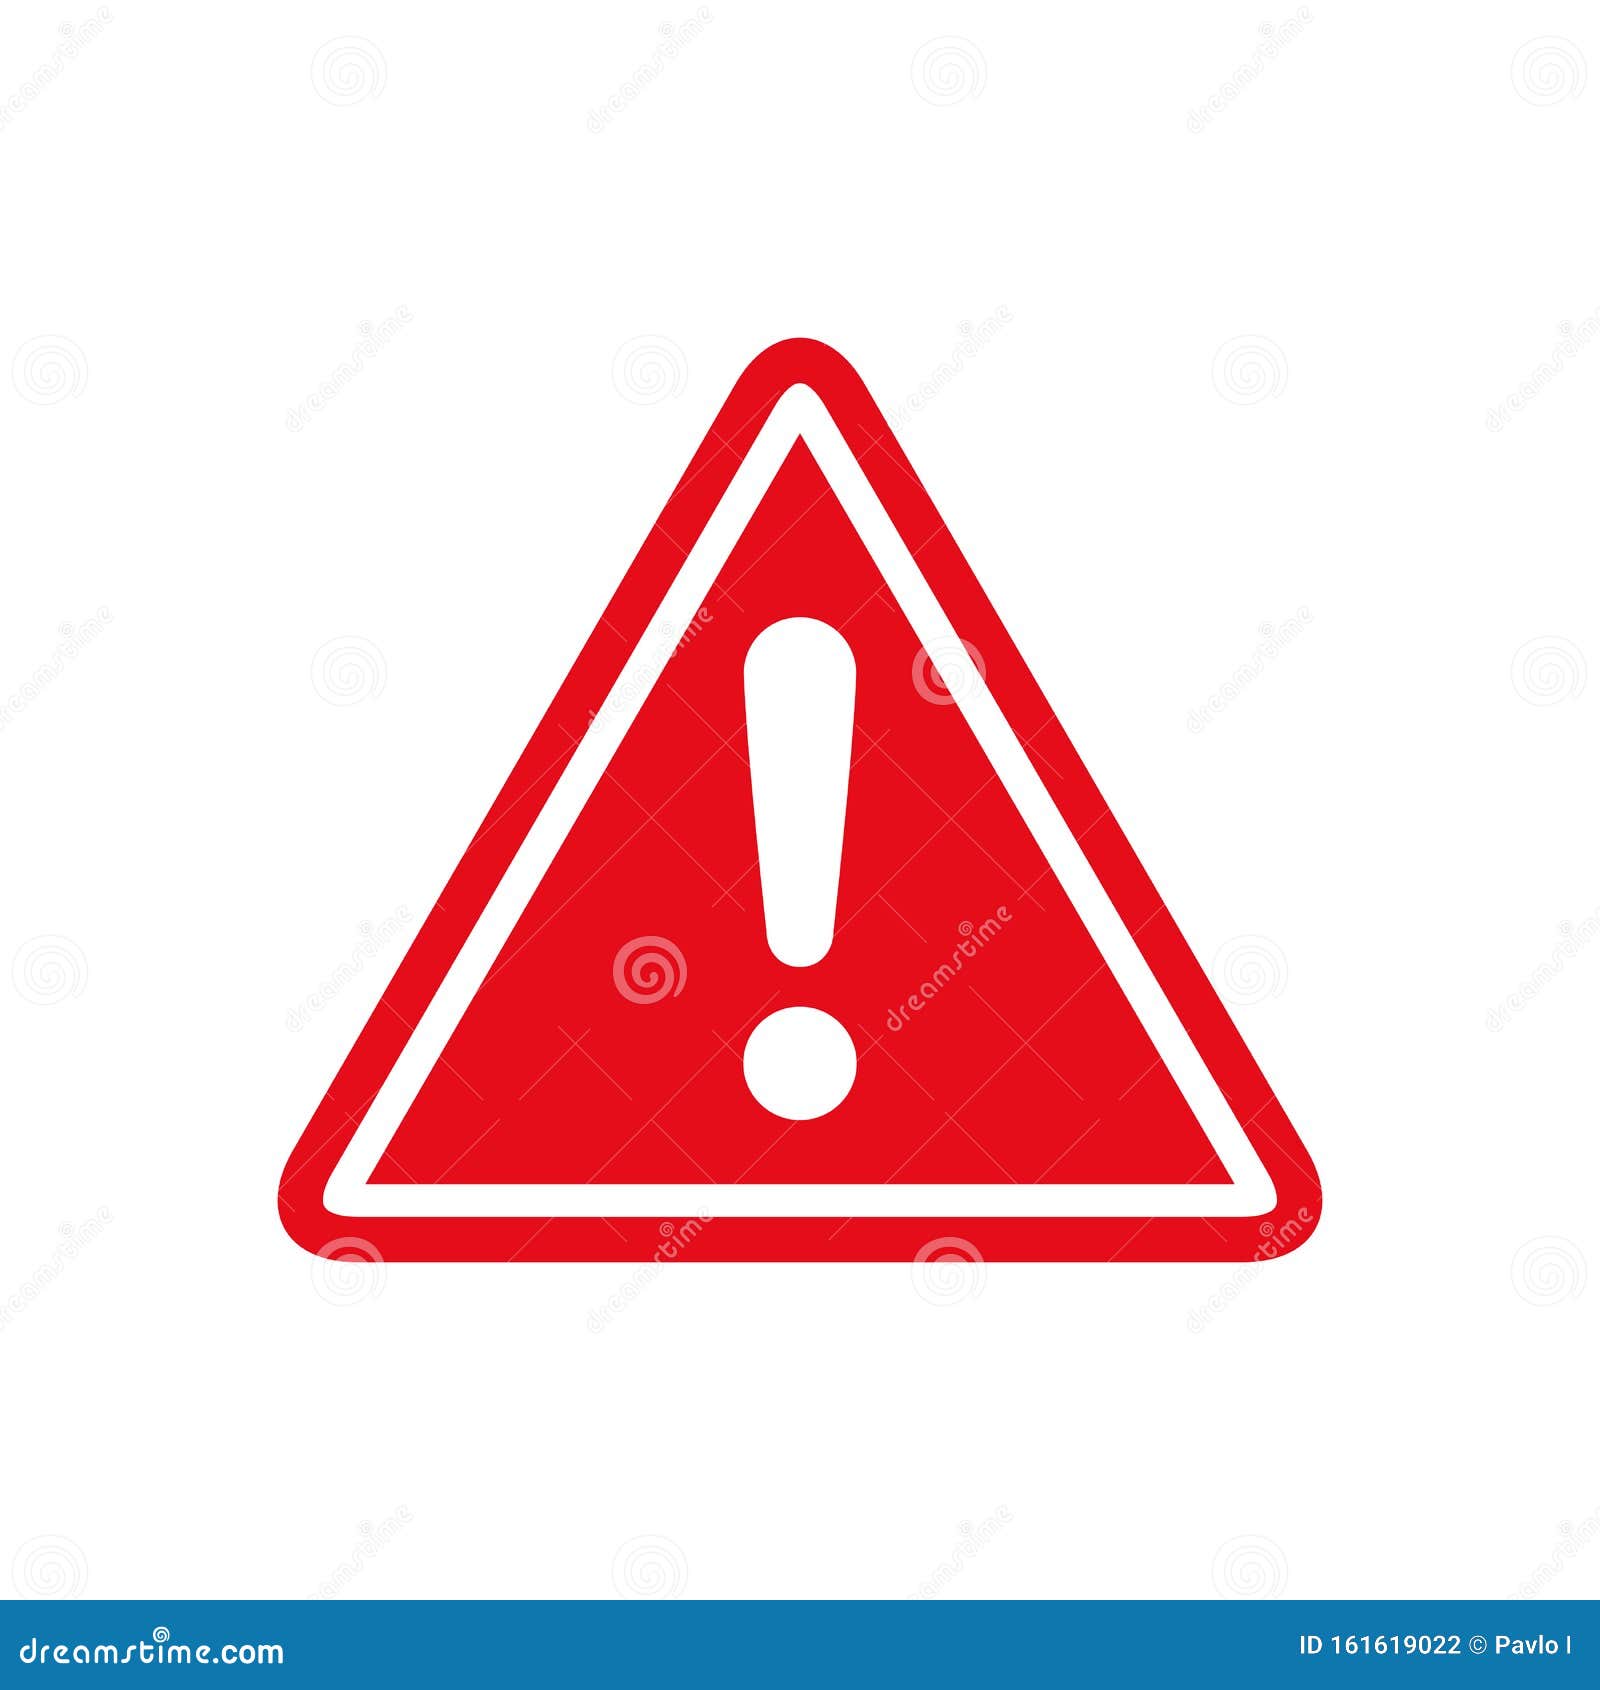 warning, precaution, attention, alert icon, exclamation mark in triangle  Ã¢â¬â 